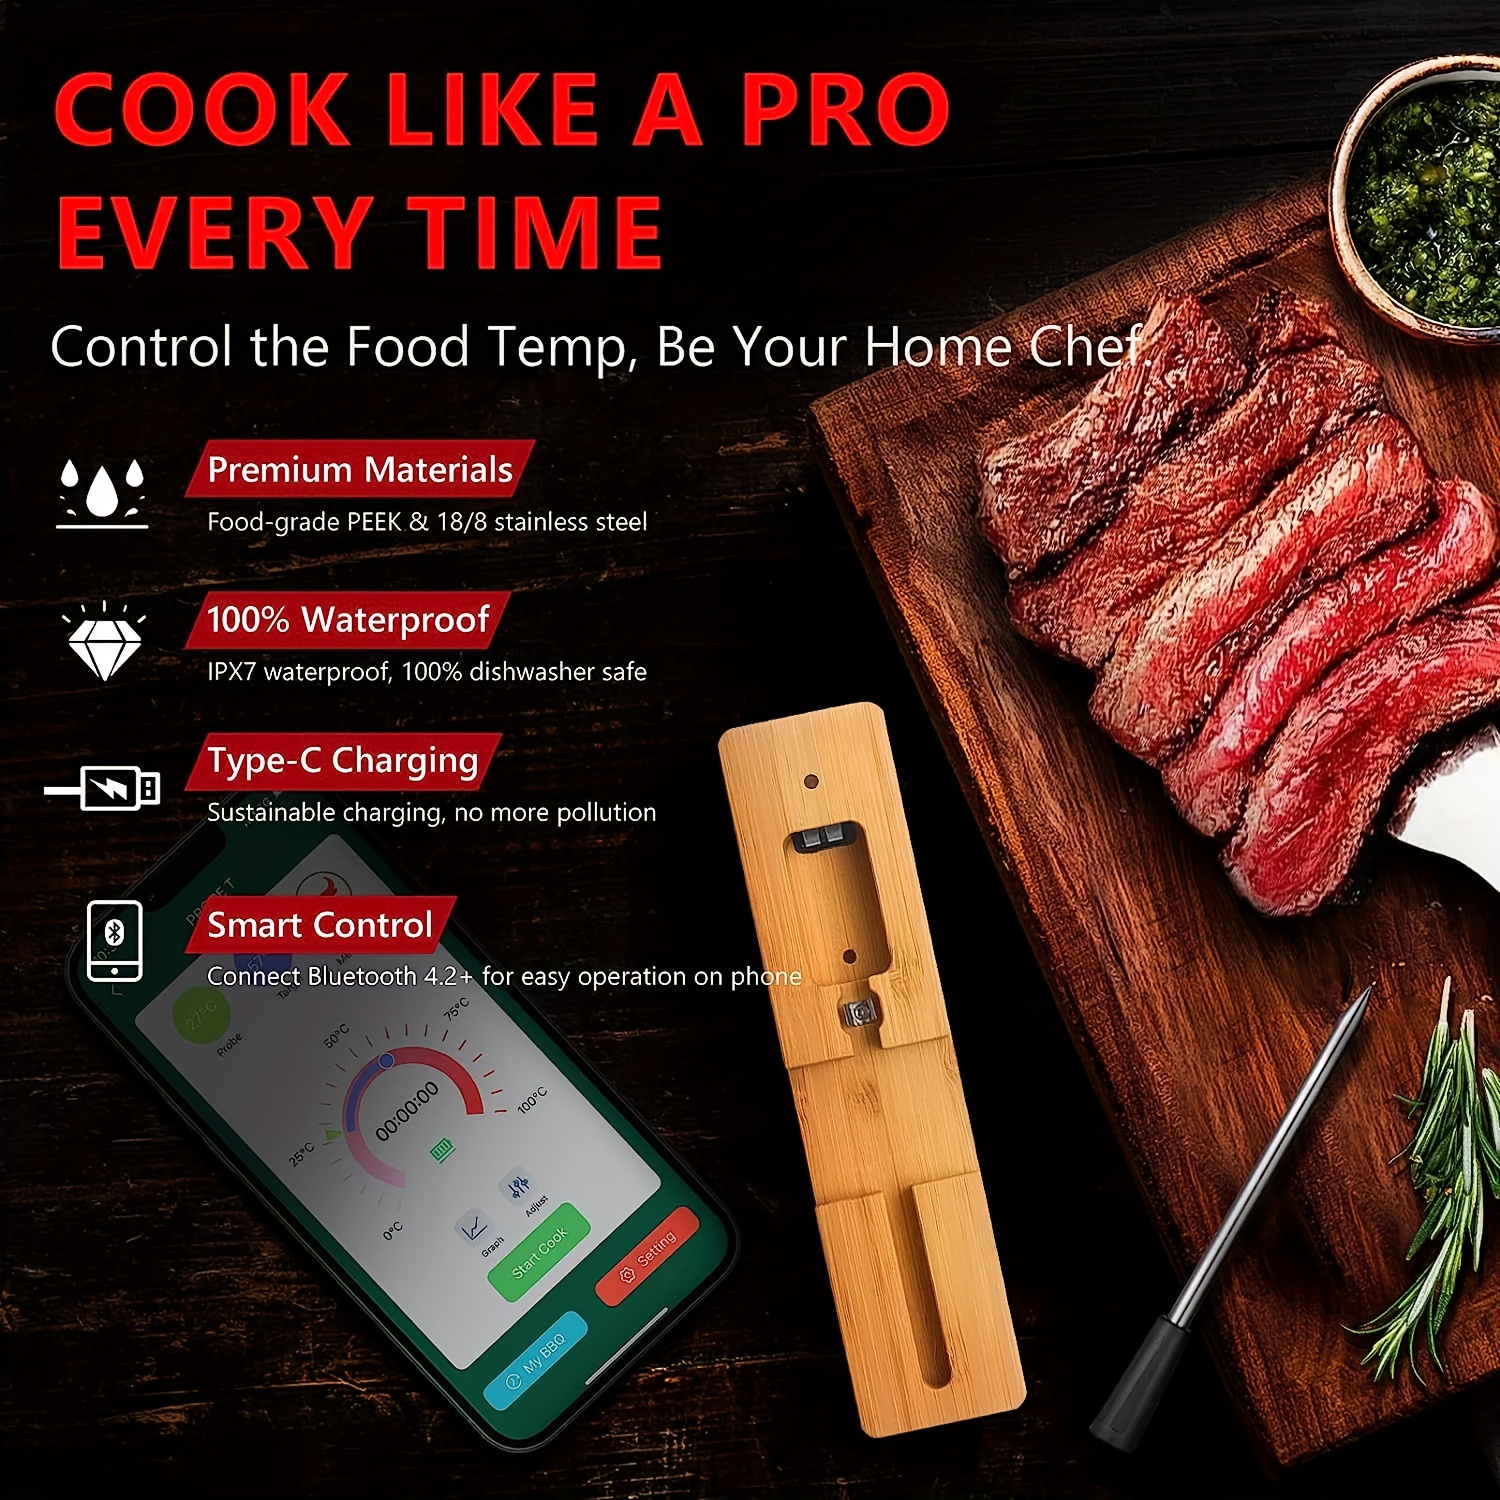 Wireless Meat Thermometer Digital Remote Food Cooking Meat